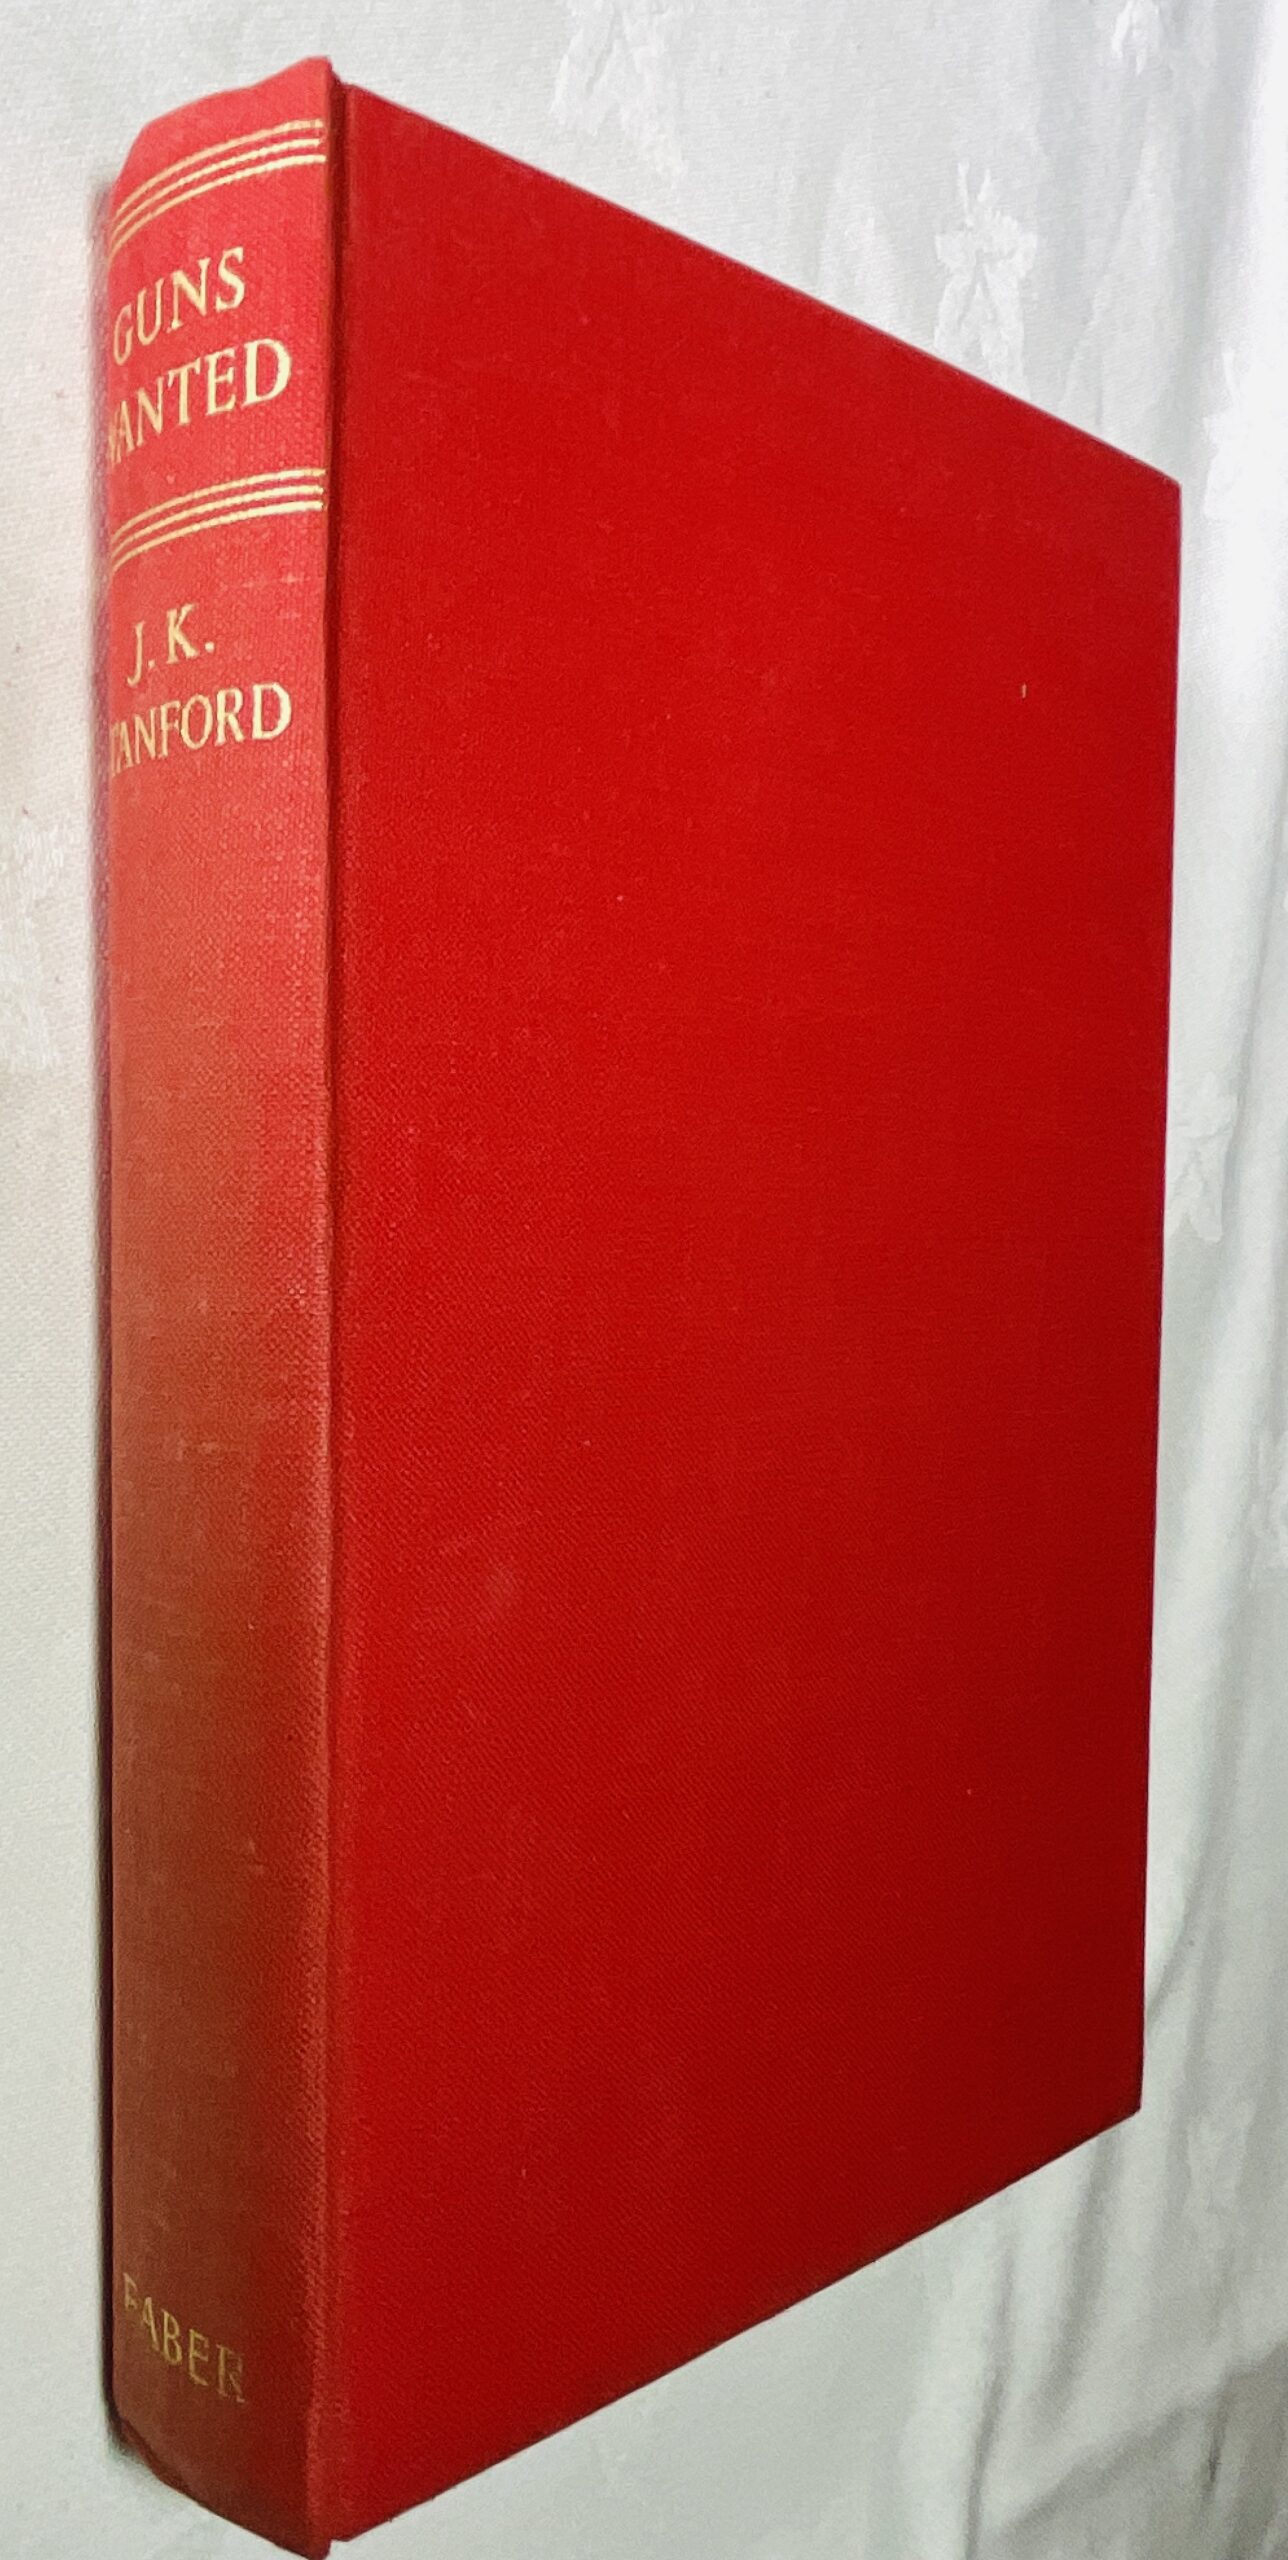 Guns Wanted by STANFORD, J. K.: (1948) First Edition.